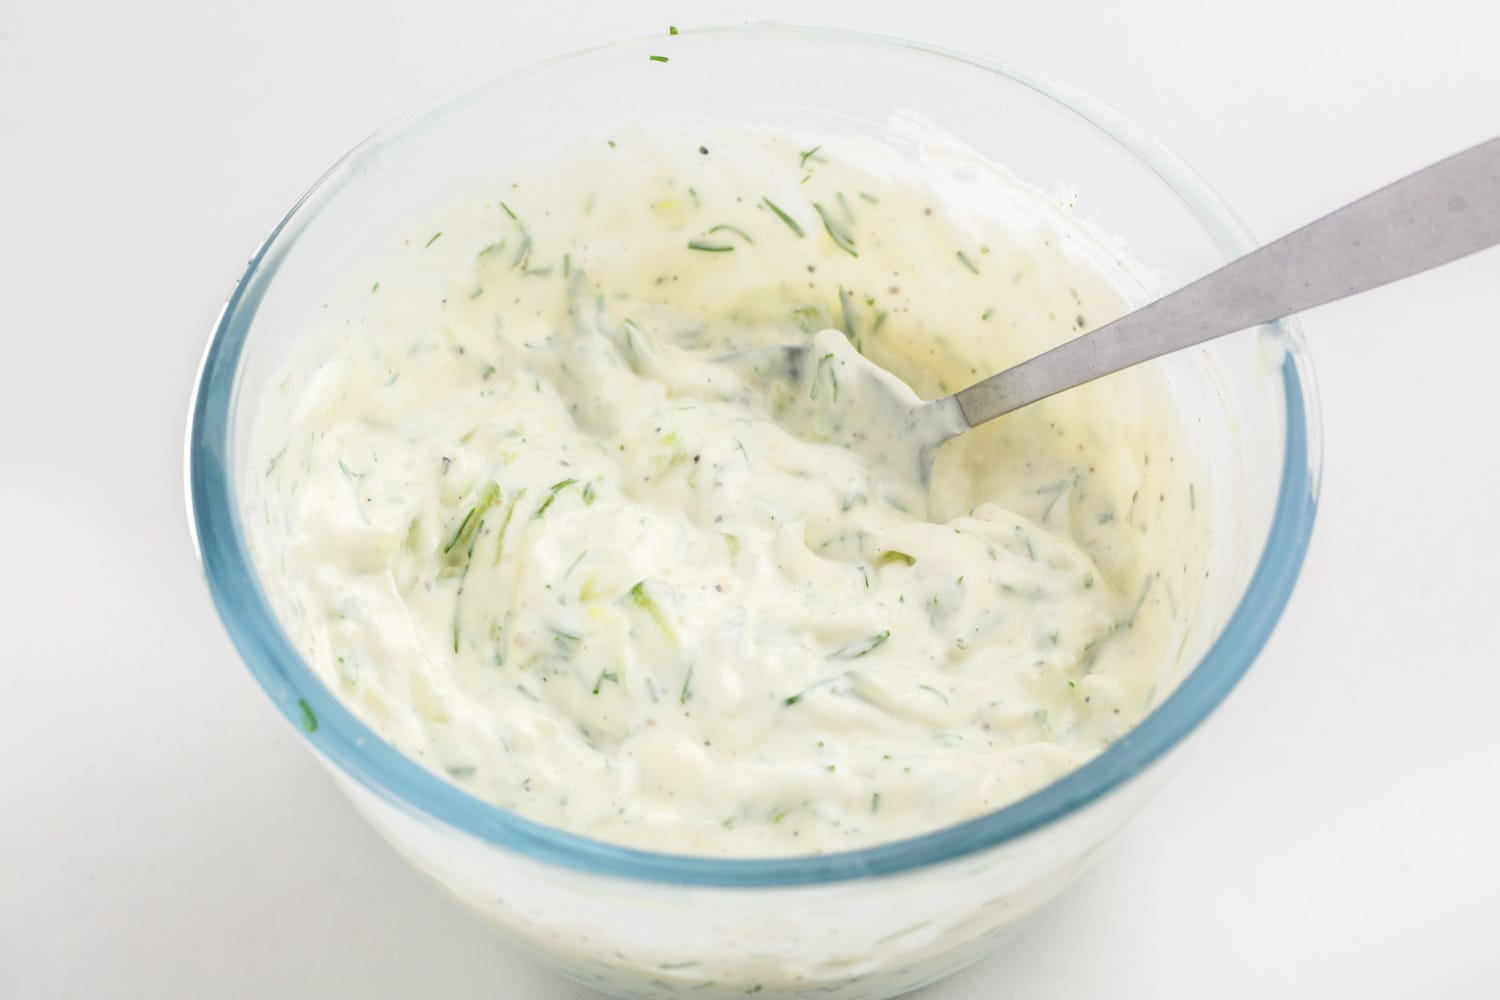 Mixed tzatziki sauce in a glass bowl with a spoon